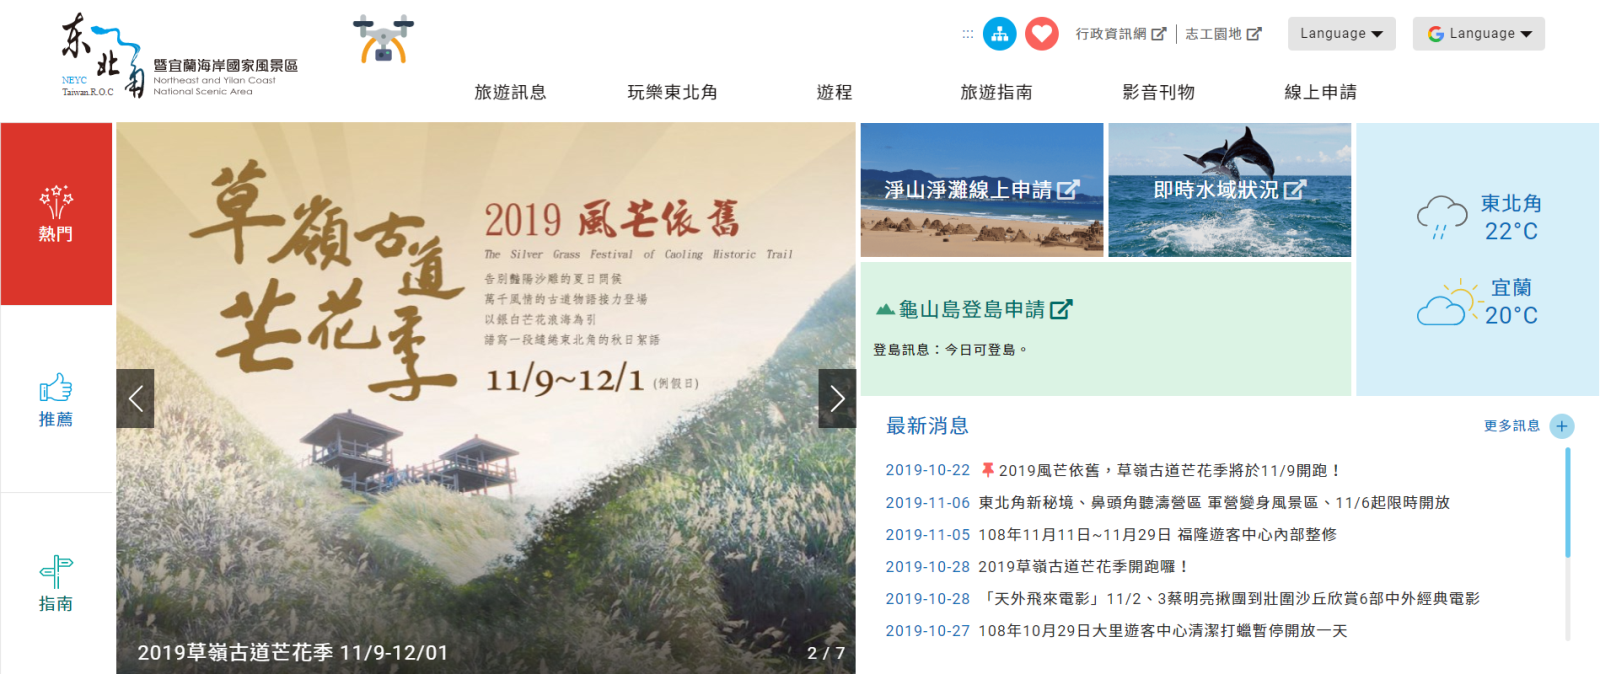 The new version of the website provides a one-stop new smart tourism service for domestic and foreign tourists